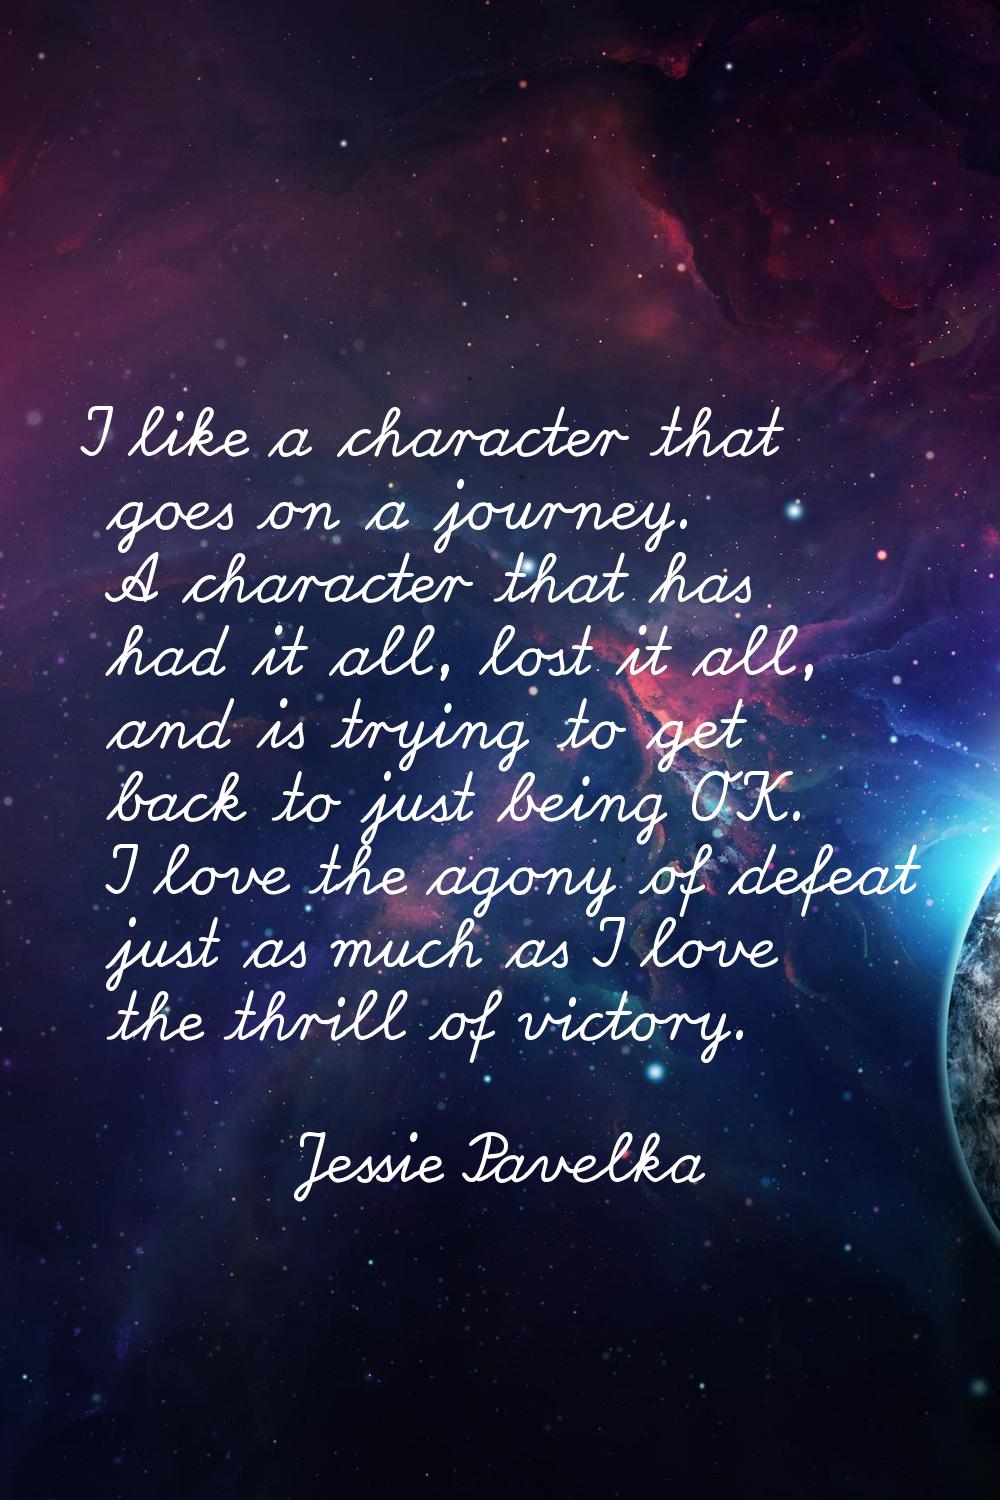 I like a character that goes on a journey. A character that has had it all, lost it all, and is try